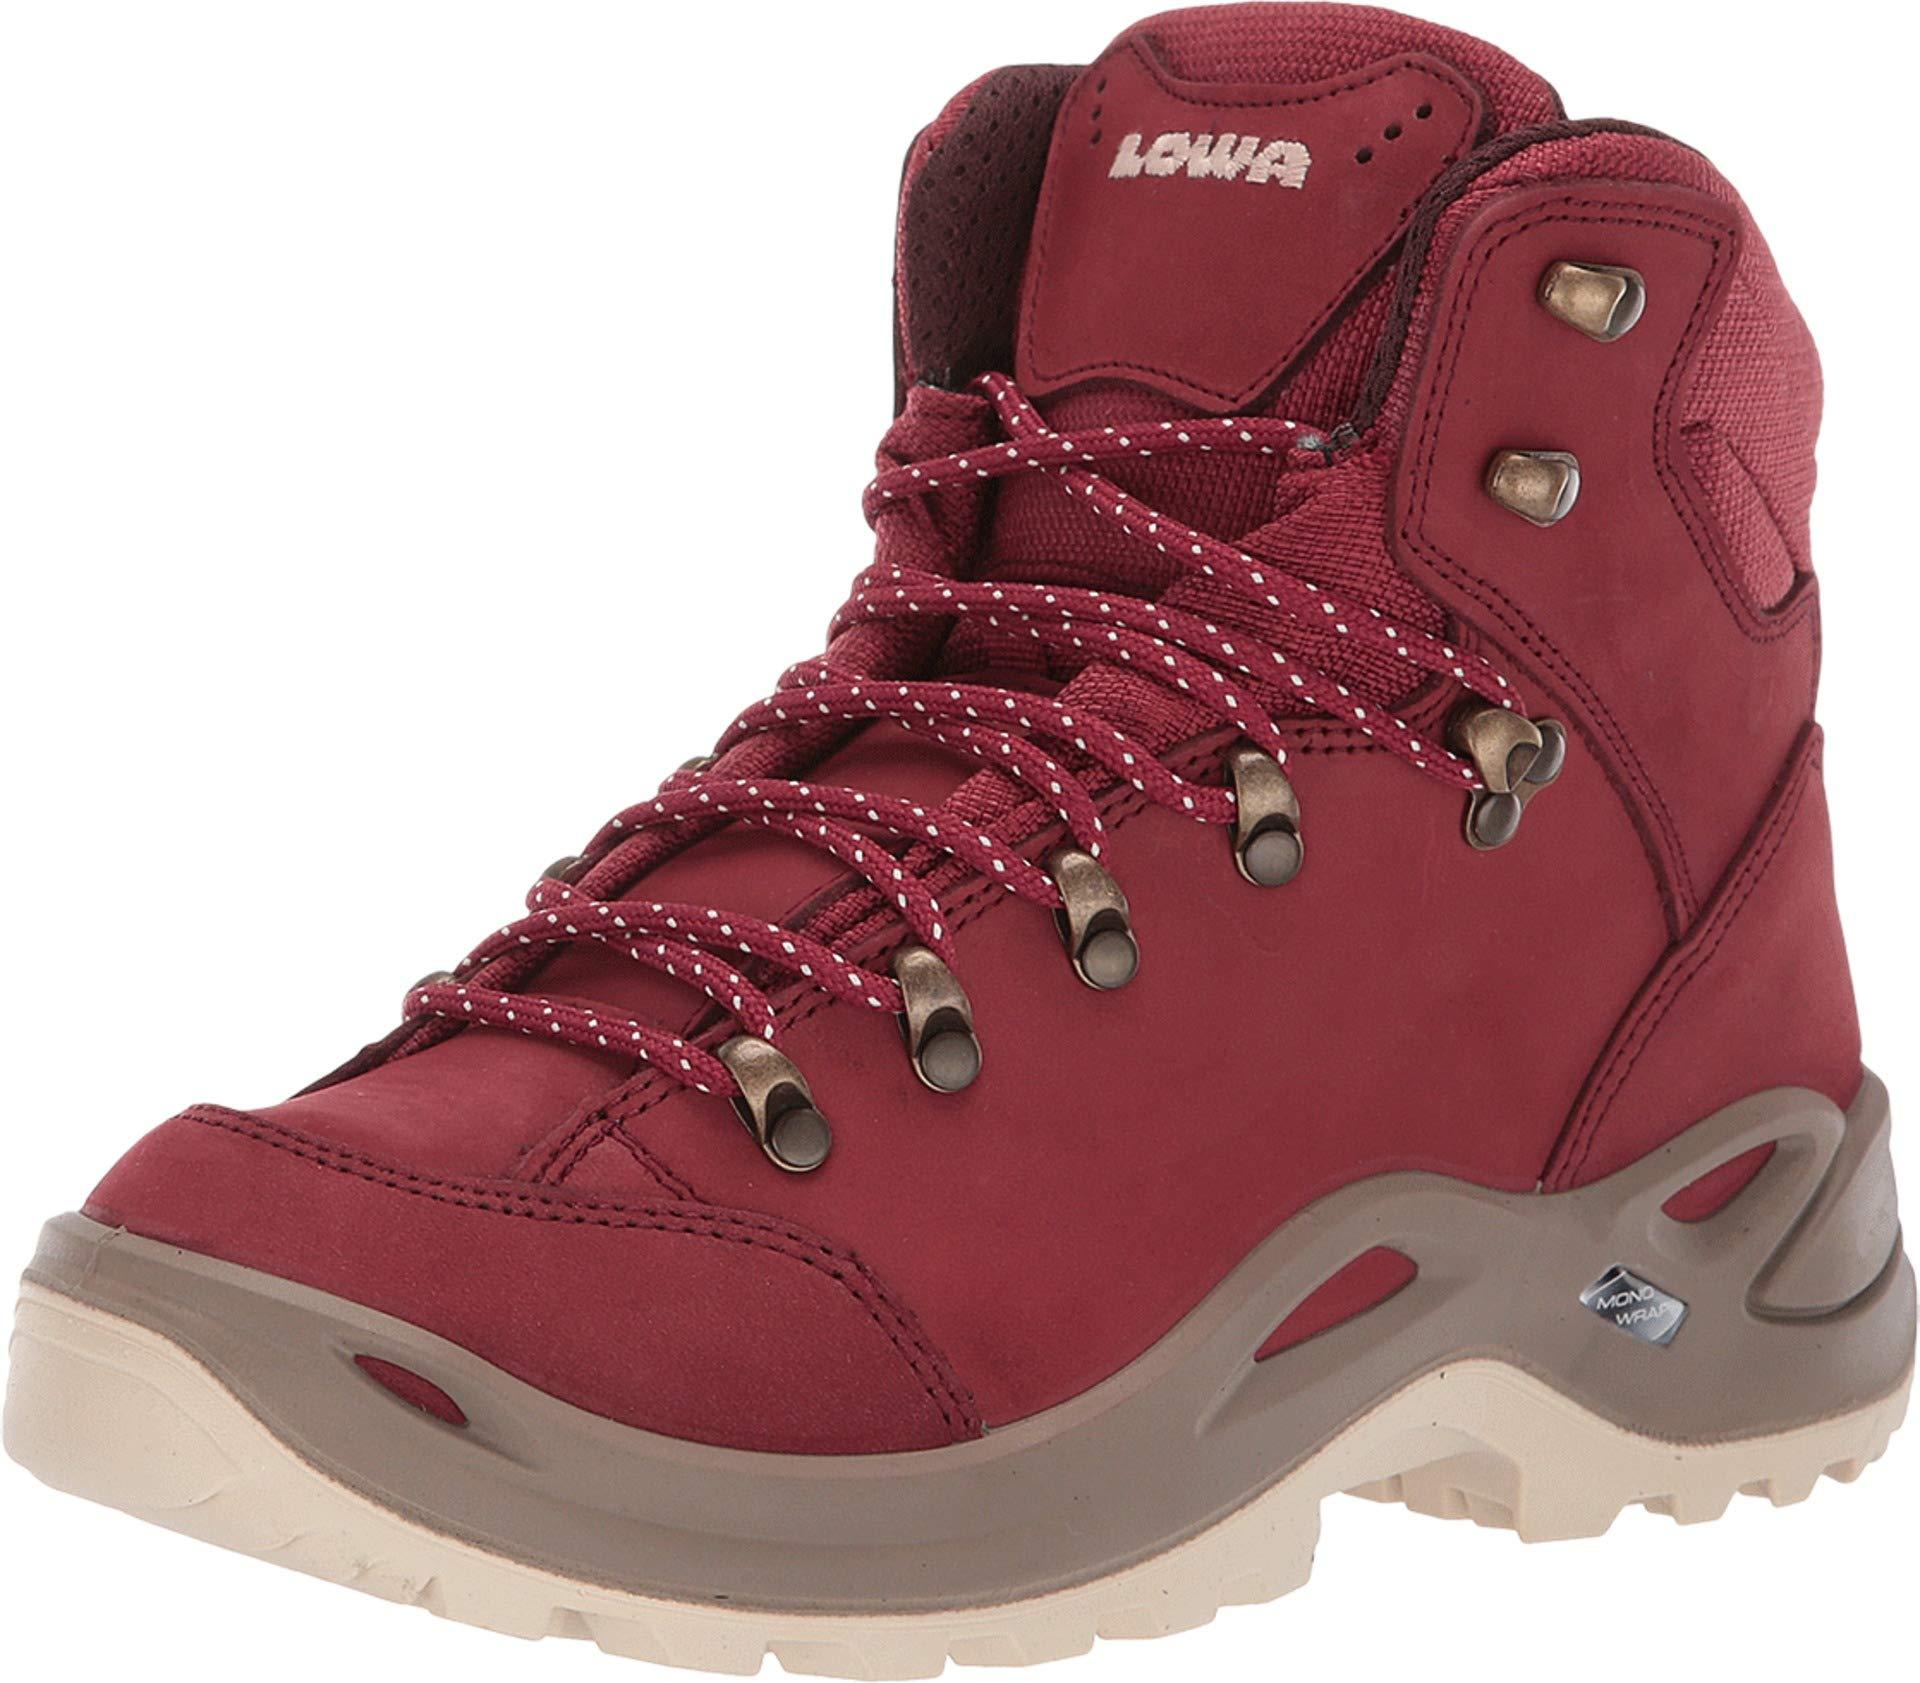 Lowa Leather Renegade Gtx(r) Mid Sp in Cayenne (Red) - Lyst